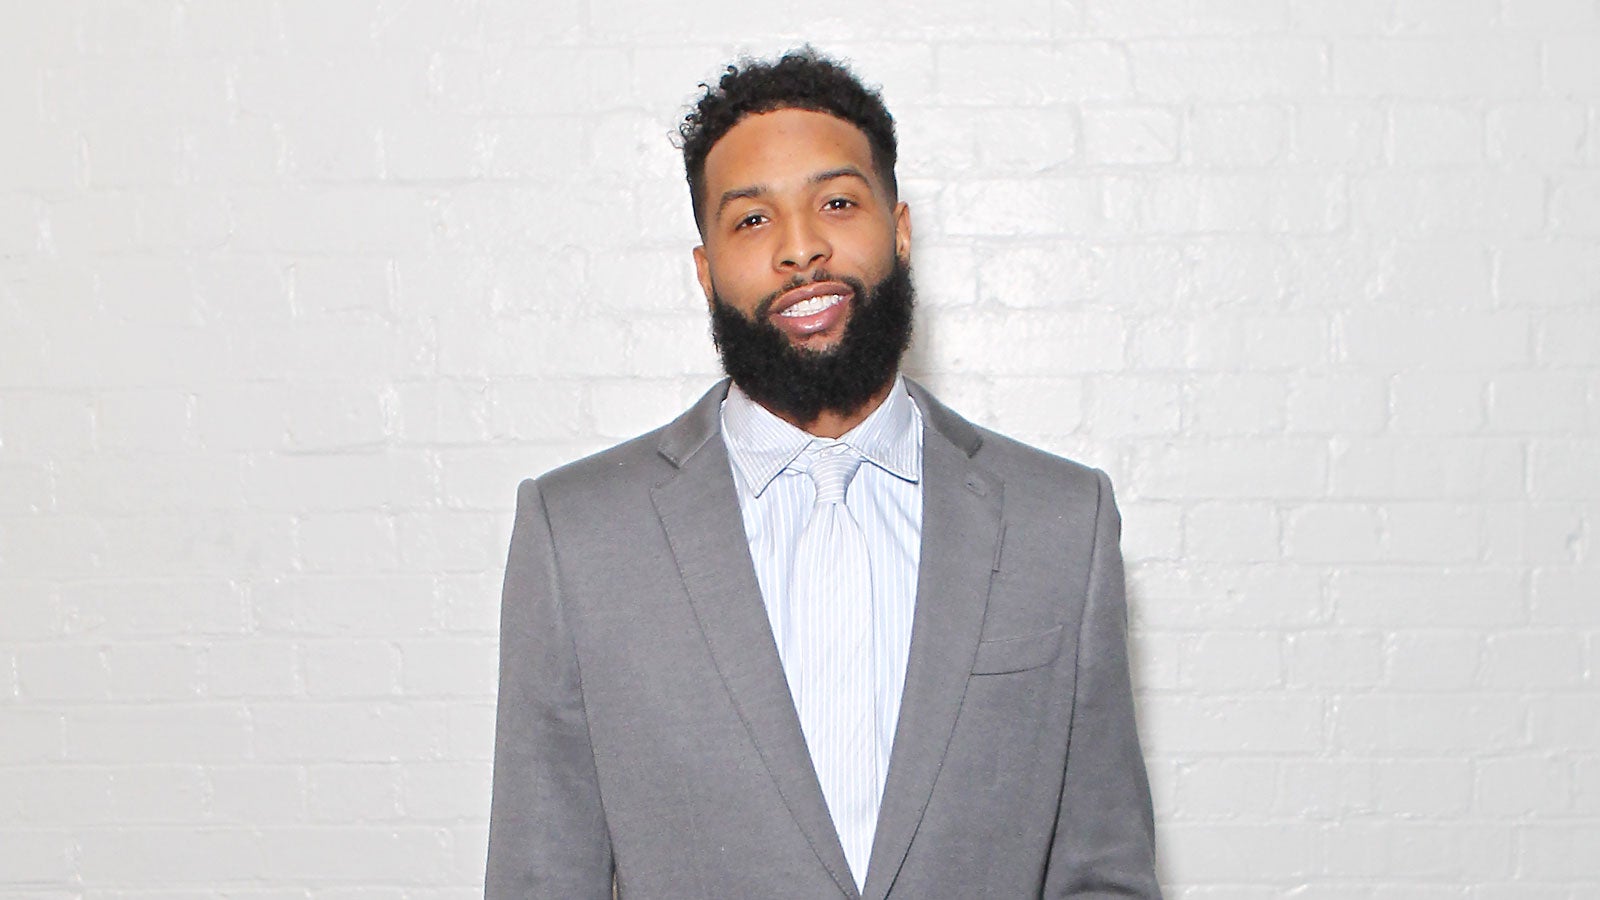 Odell Beckham Jr. Launches Justice Tee In Support Of The Black Lives Matter Movement